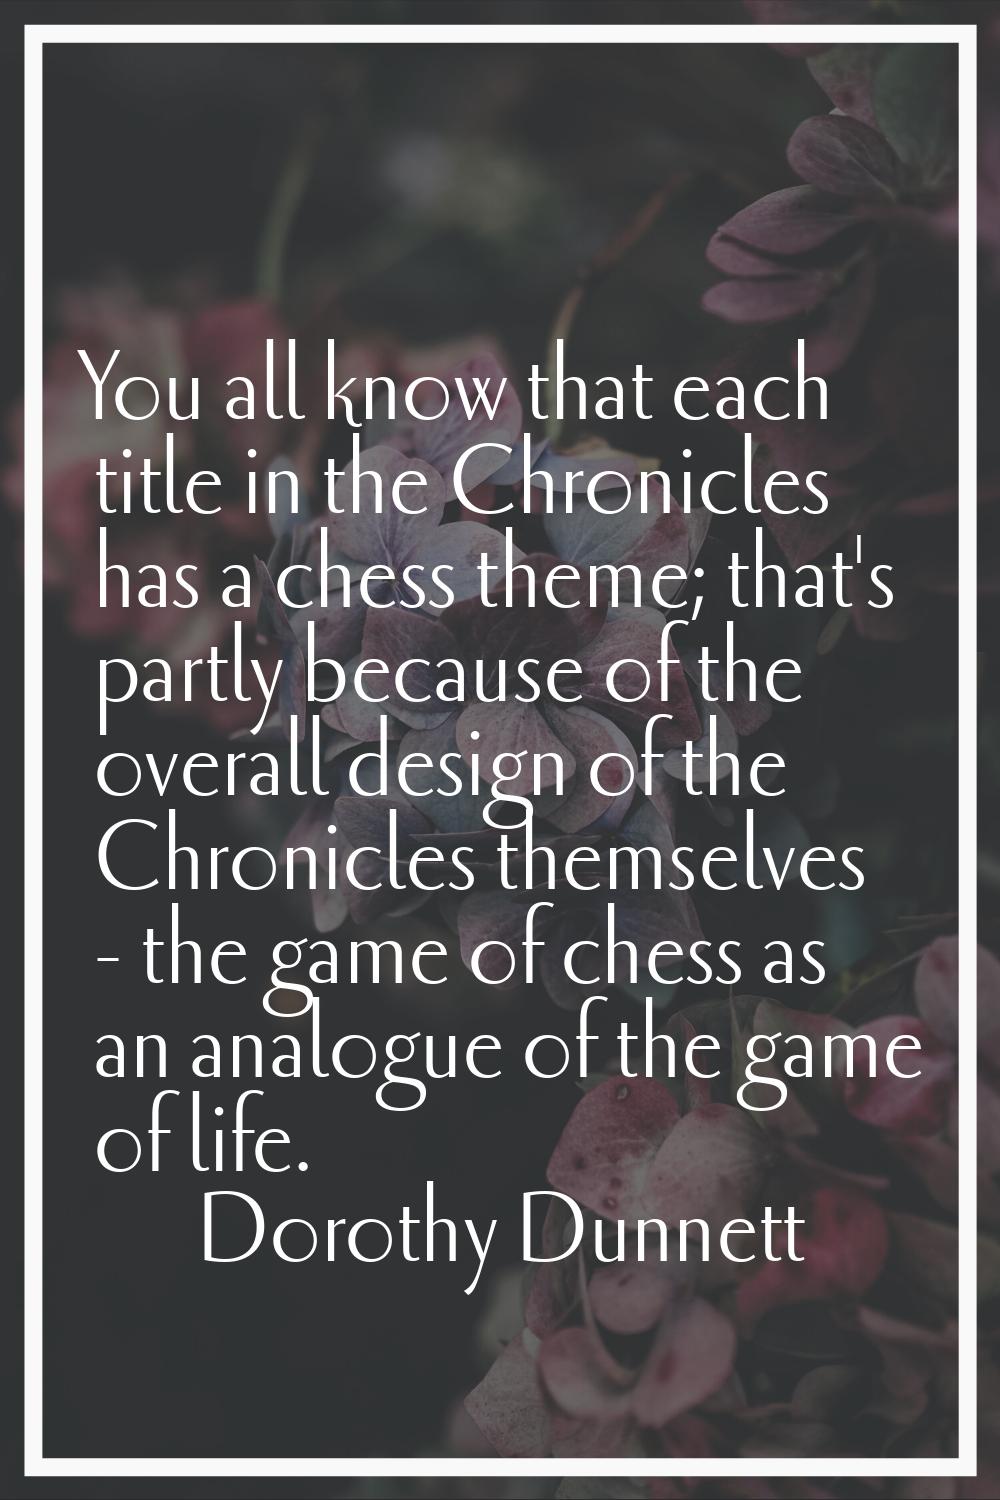 You all know that each title in the Chronicles has a chess theme; that's partly because of the over